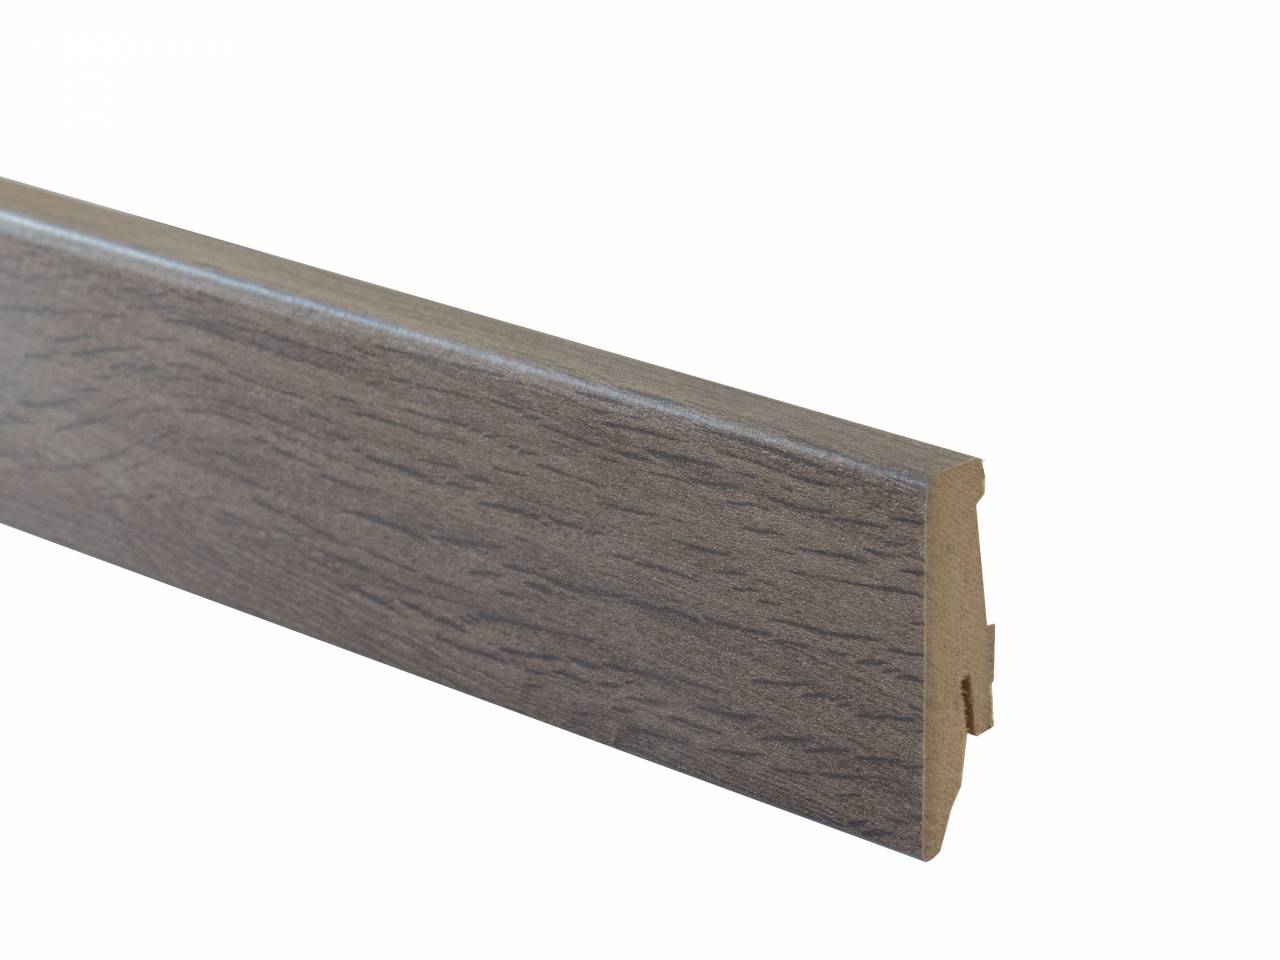 Wooden floor skirting with cable channel and height 50 mm. Suitable for laminate flooring in gray-brown color. . Length 2.6 m.